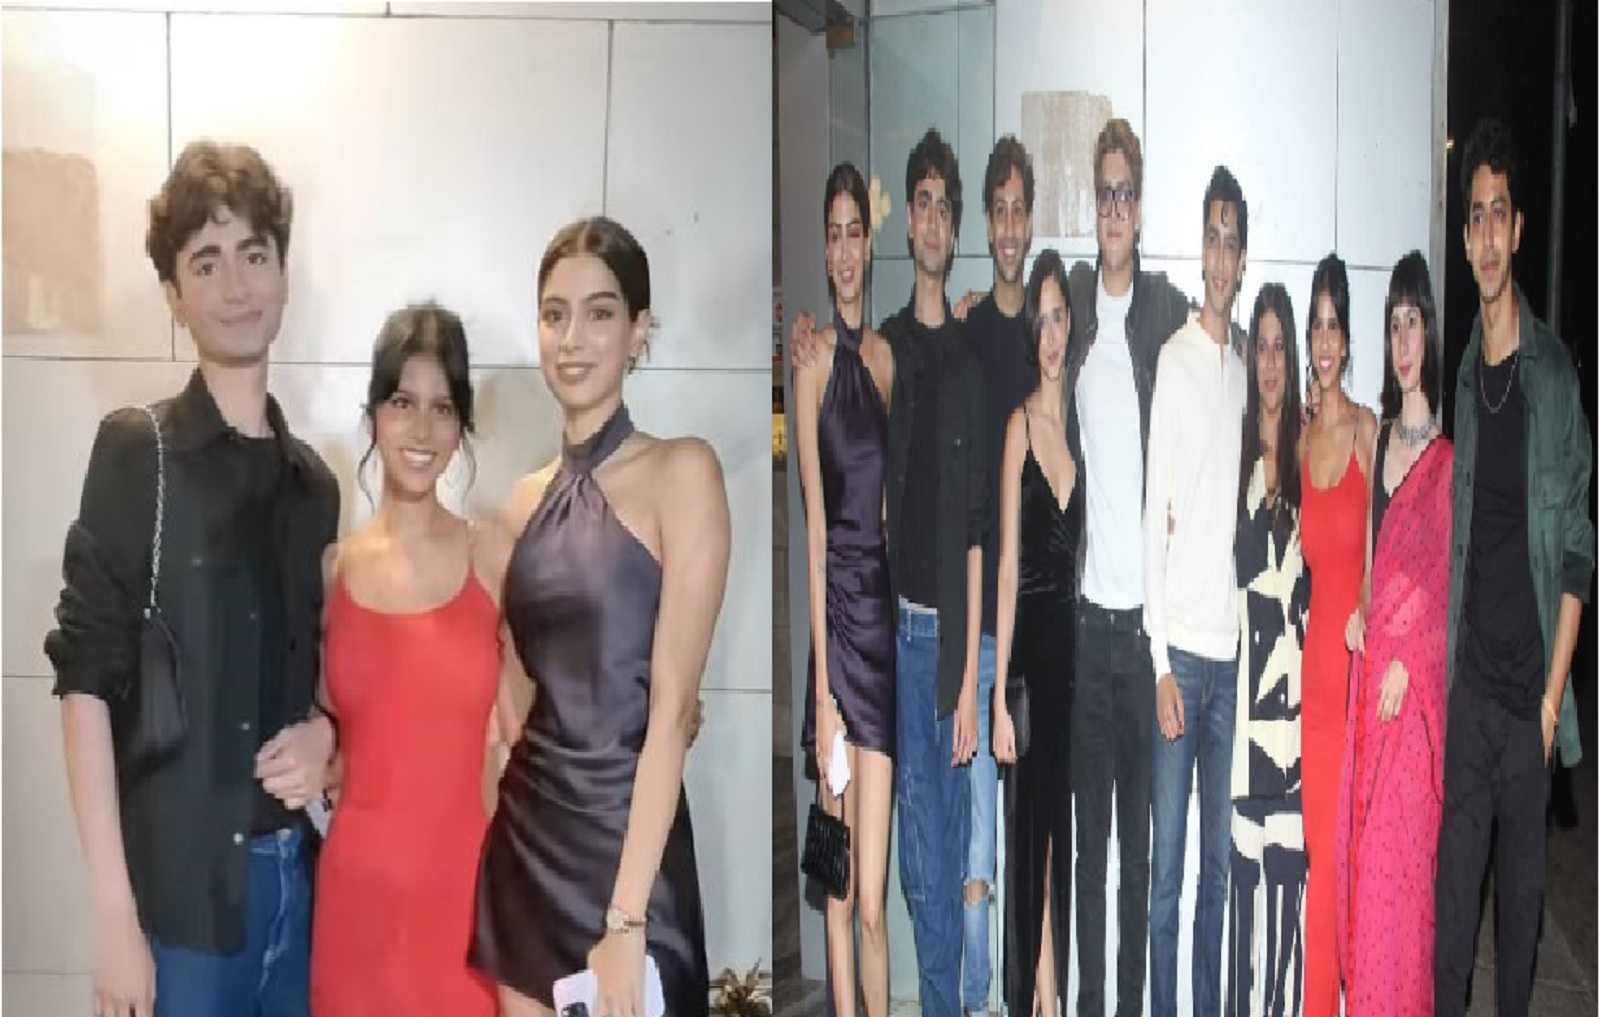 The Archies wrap-up party: Suhana Khan raises temperature in bodycon dress, Khushi Kapoor looks pretty in short dress